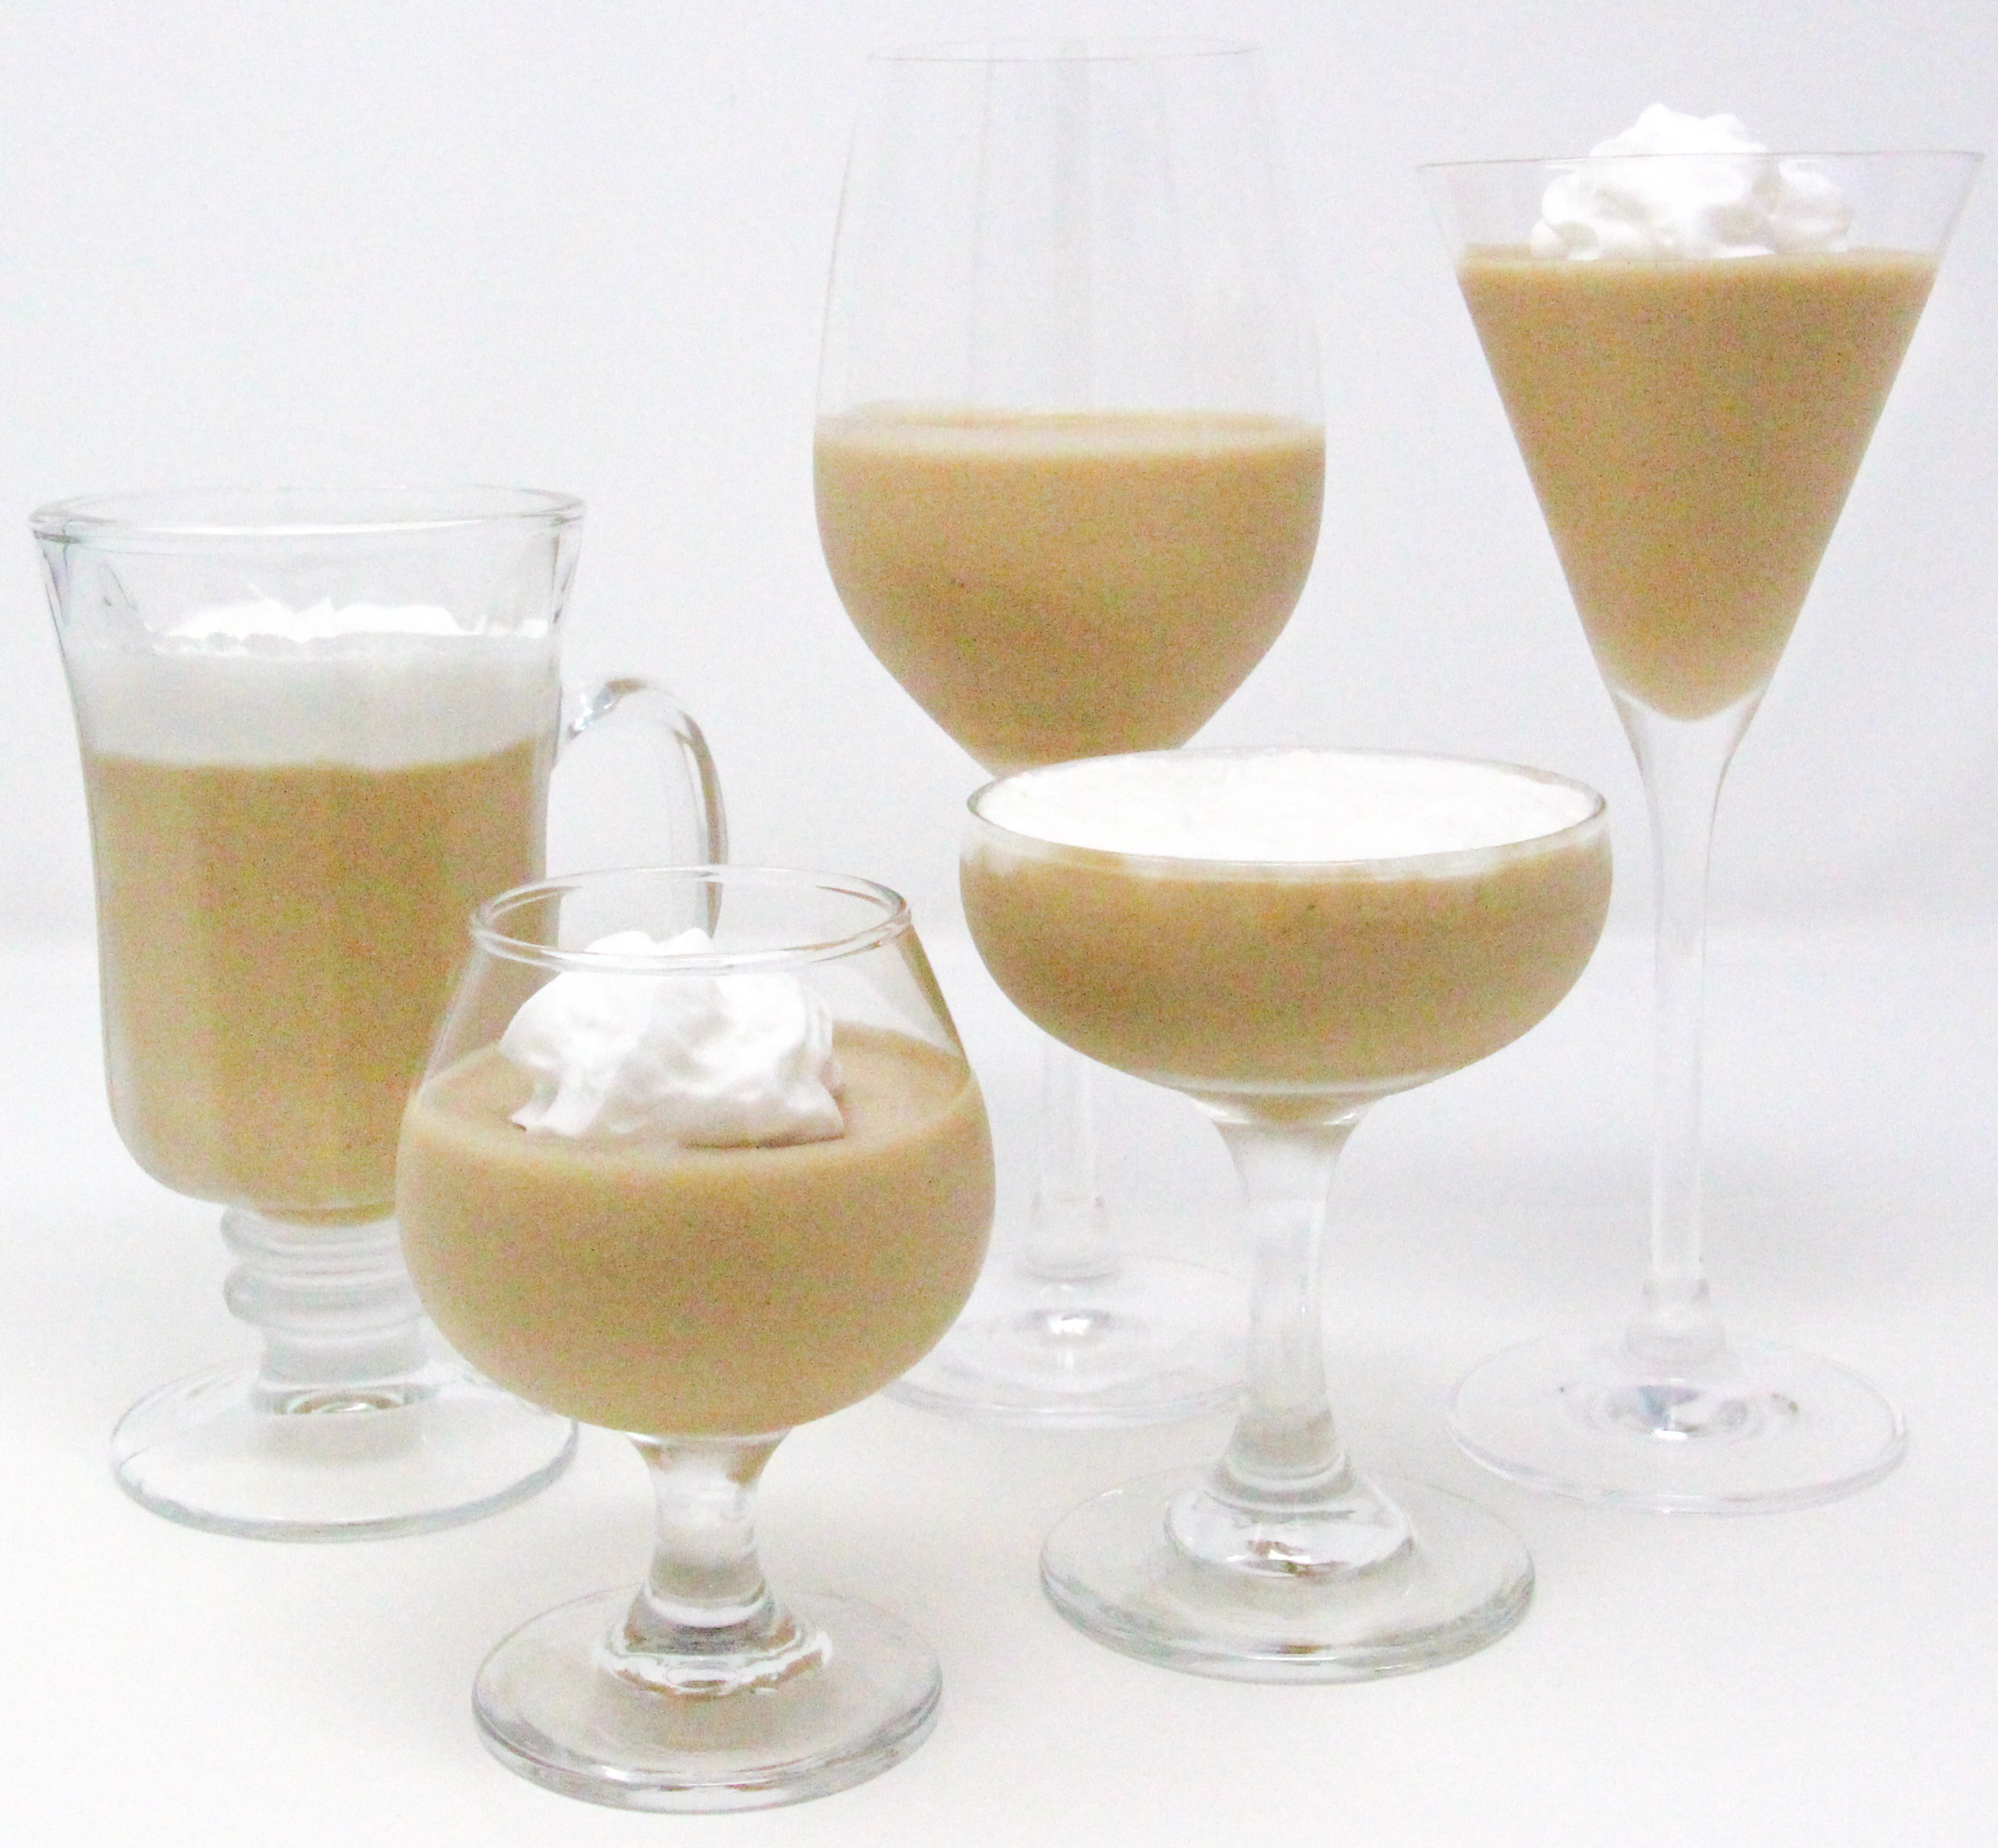 Irish Coffee Mallow is a delicious twist on traditional Irish coffee and makes the perfect ending to your St. Patrick's Day dinner. Recipe shared with permission granted by Peggy Ehrhart, author of IRISH MILKSHAKE MURDER. 